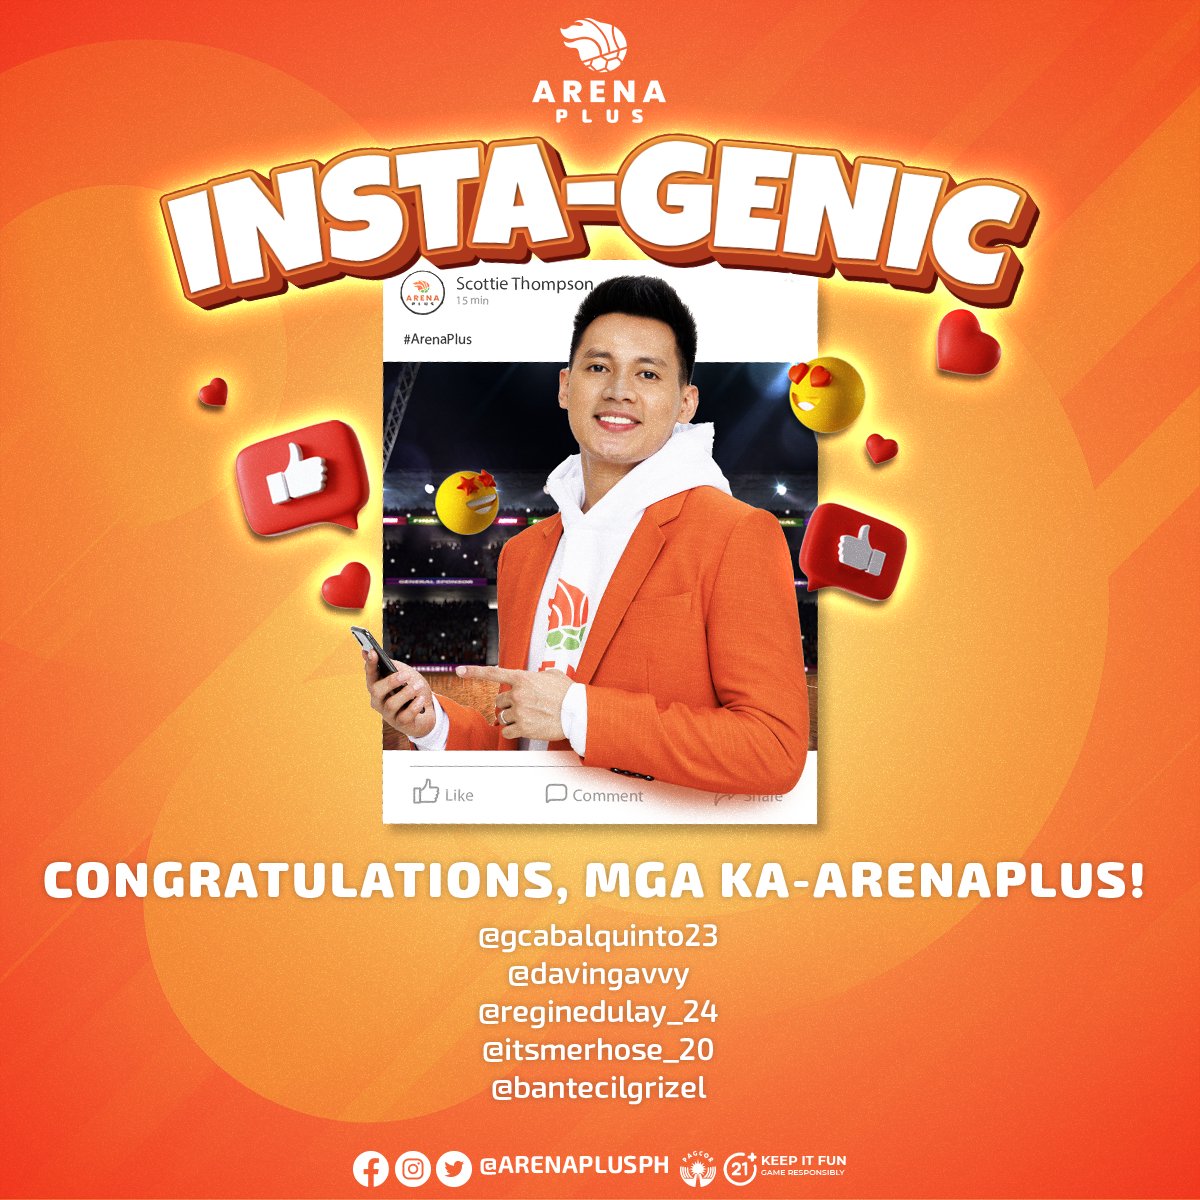 Congrats sa winners ng ating ArenaPlus Insta-Genic promo! If you’re on the list, mag-DM lang sa amin on how to claim your prize. 👌🏻

#ArenaPlusPH #AstigSaSports #ArenaPlusInstaGenic #giveaway #twittergiveaway #prizes